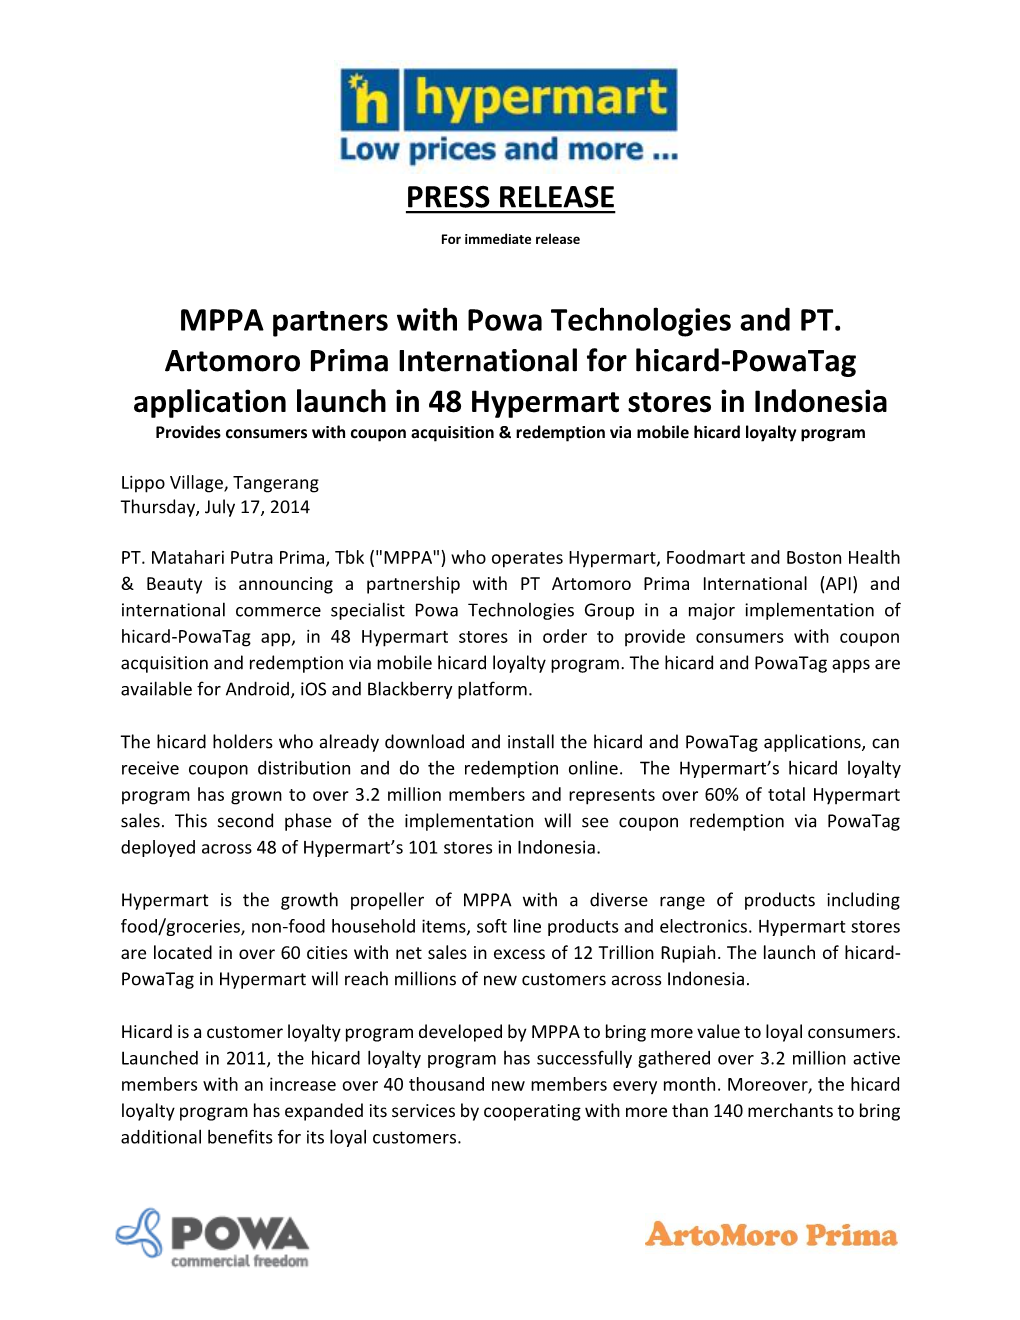 PRESS RELEASE MPPA Partners with Powa Technologies and PT